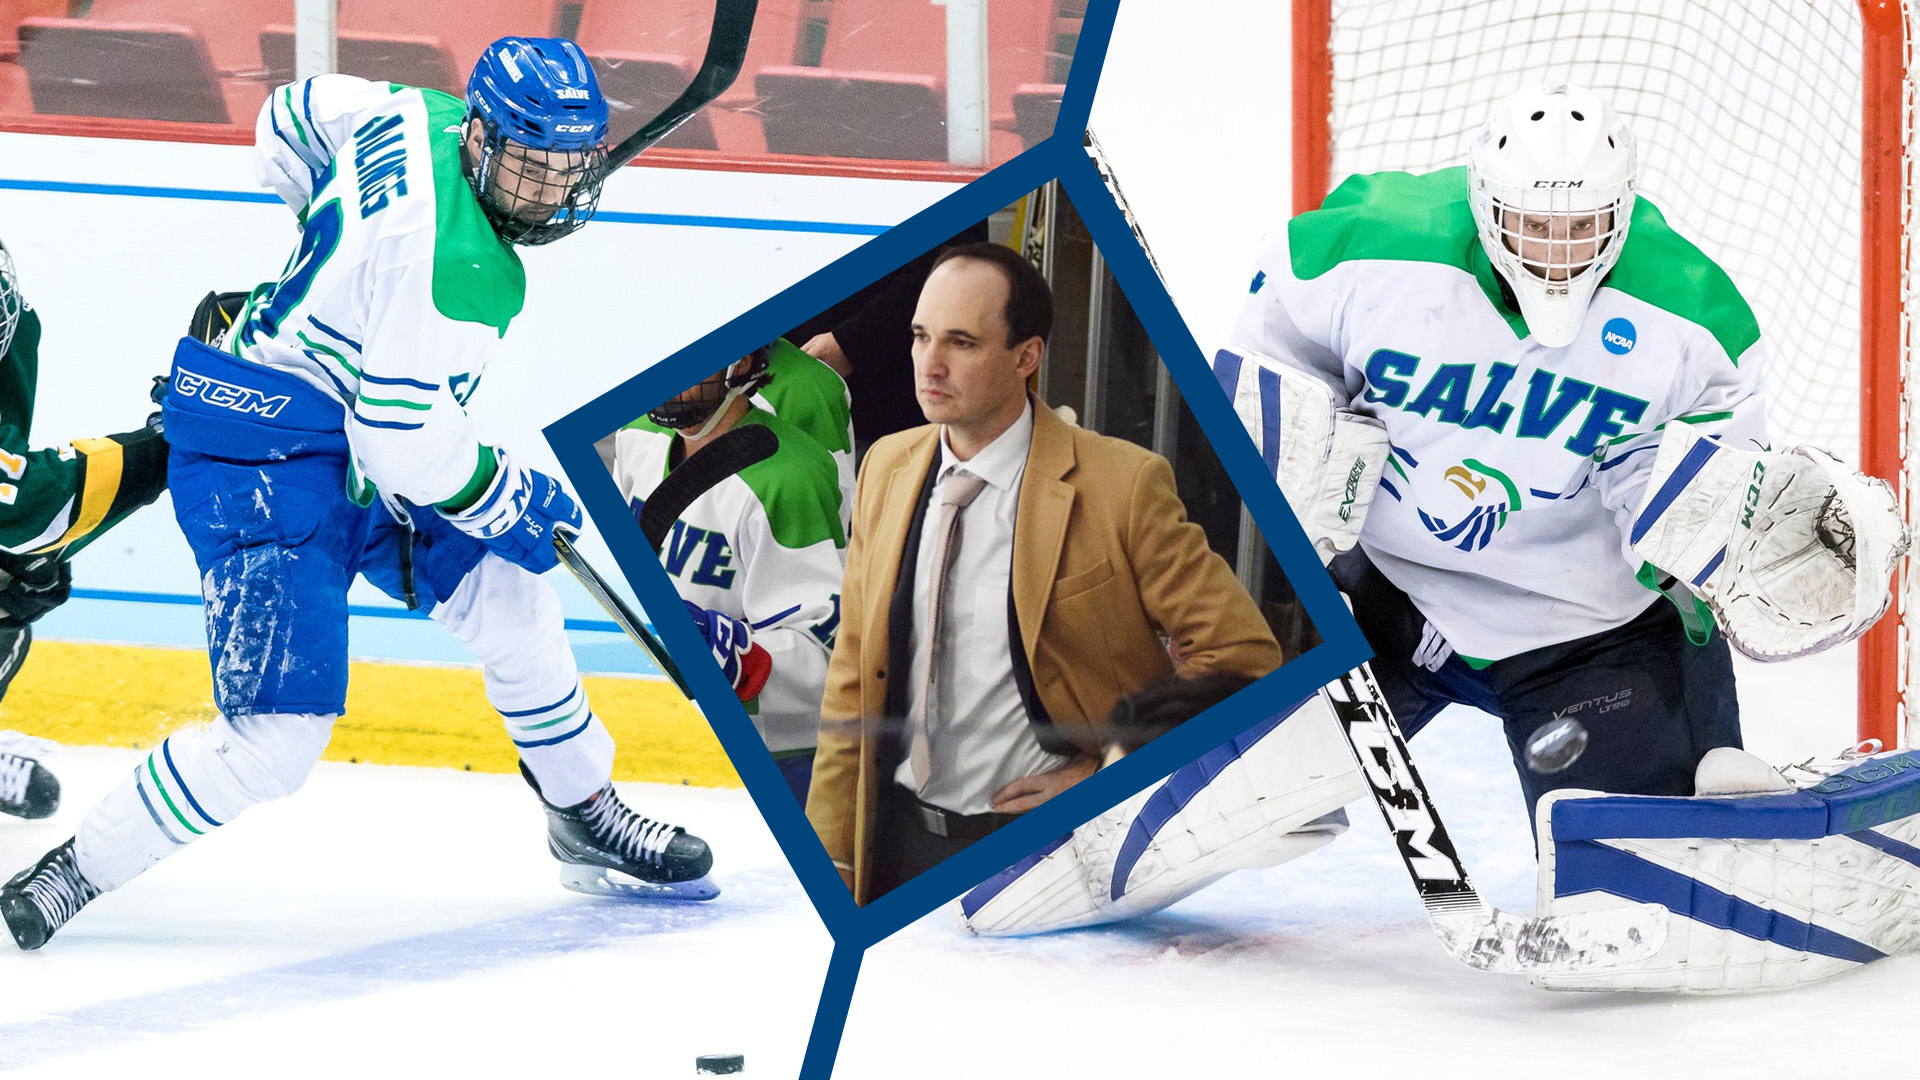 Head coach Zech Klann along with forward Jack Billings and goaltender Blake Wojtala have all been recognized by the New England Hockey Writers.